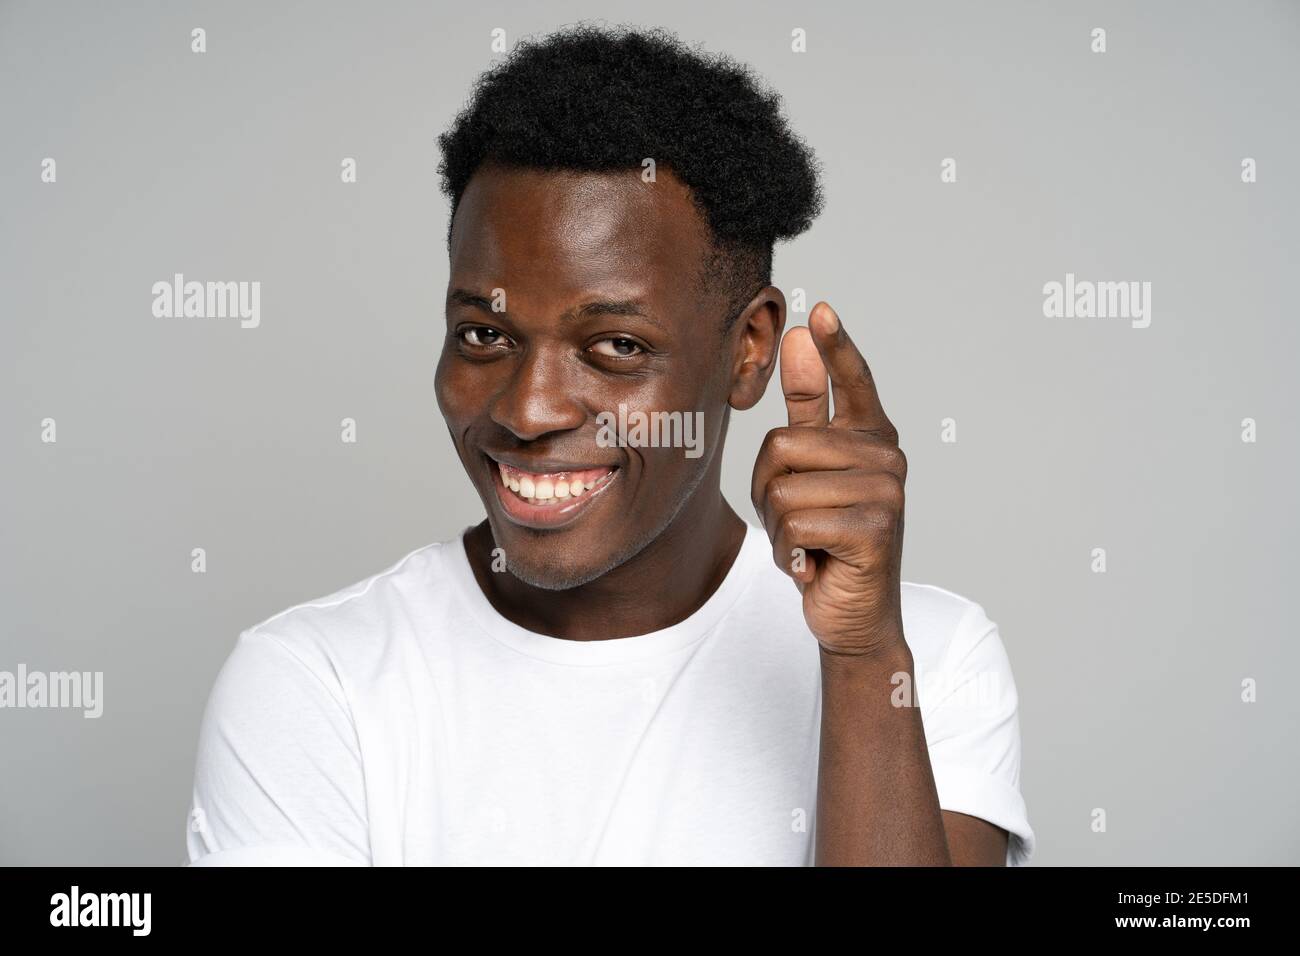 Cheerful positive Afro hipster man smiling broadly, pointing a finger at you, studio grey background Stock Photo